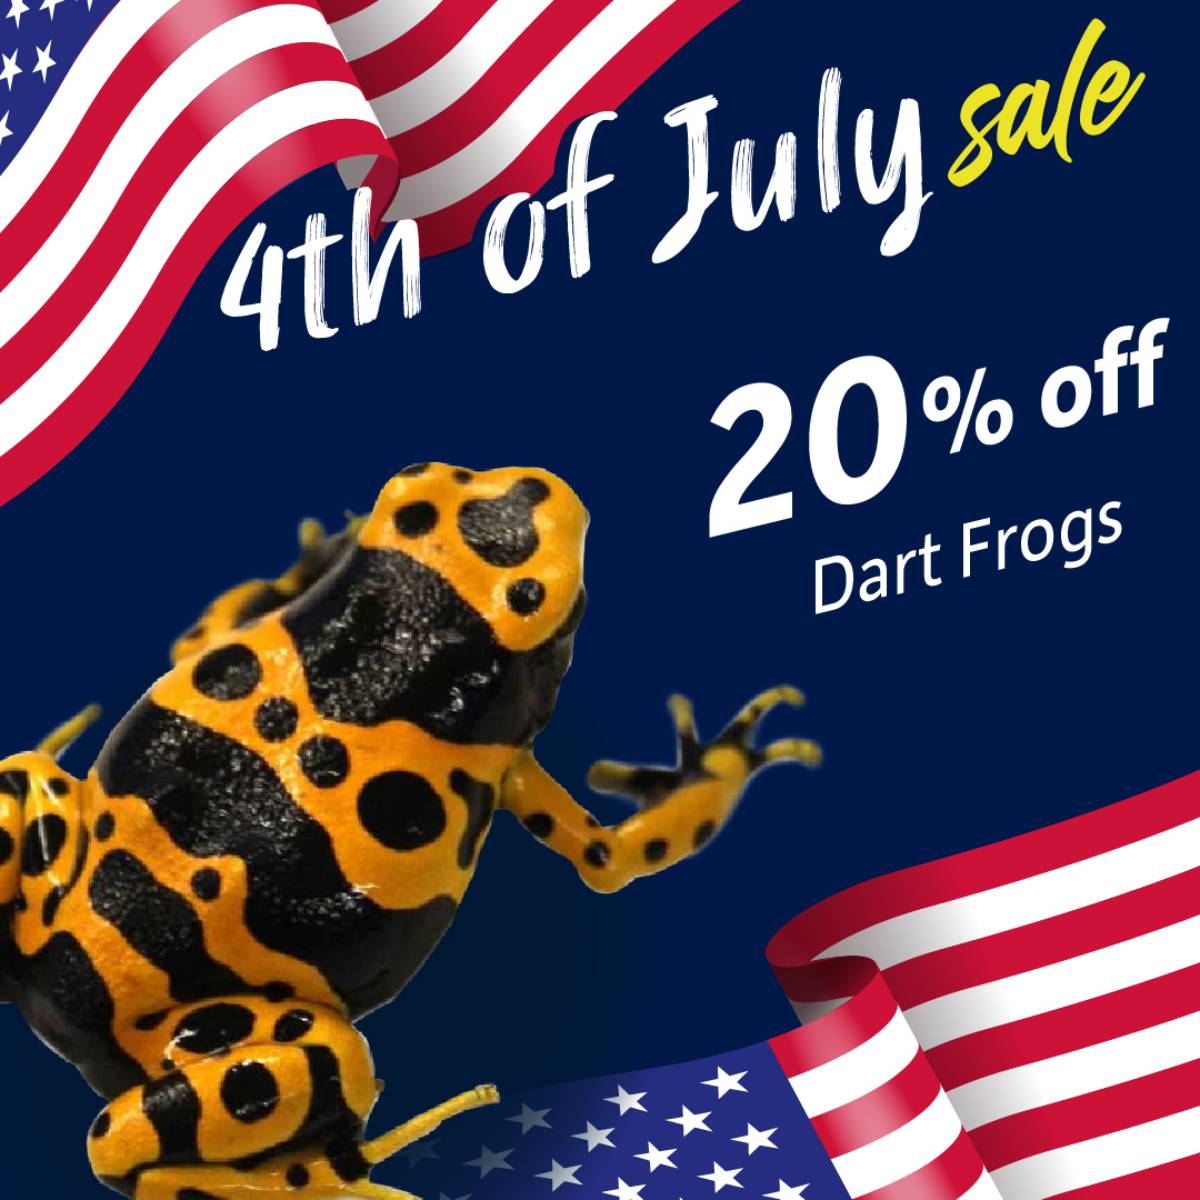 Save 20% on dart frogs.